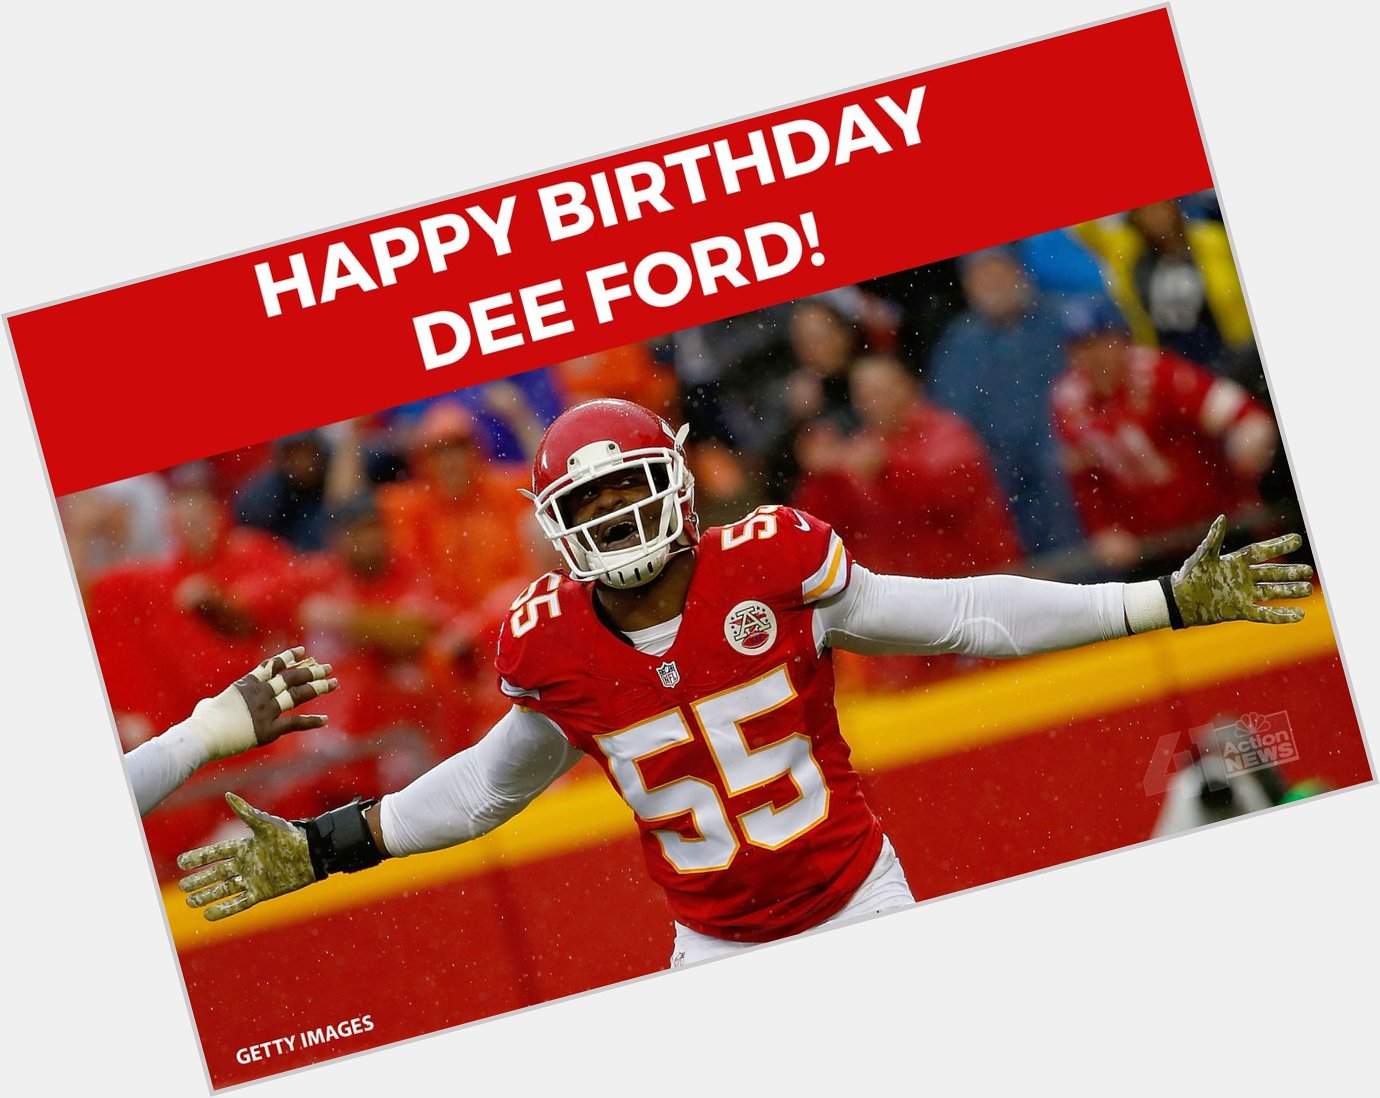 HAPPY BIRTHDAY to player Dee Ford! 